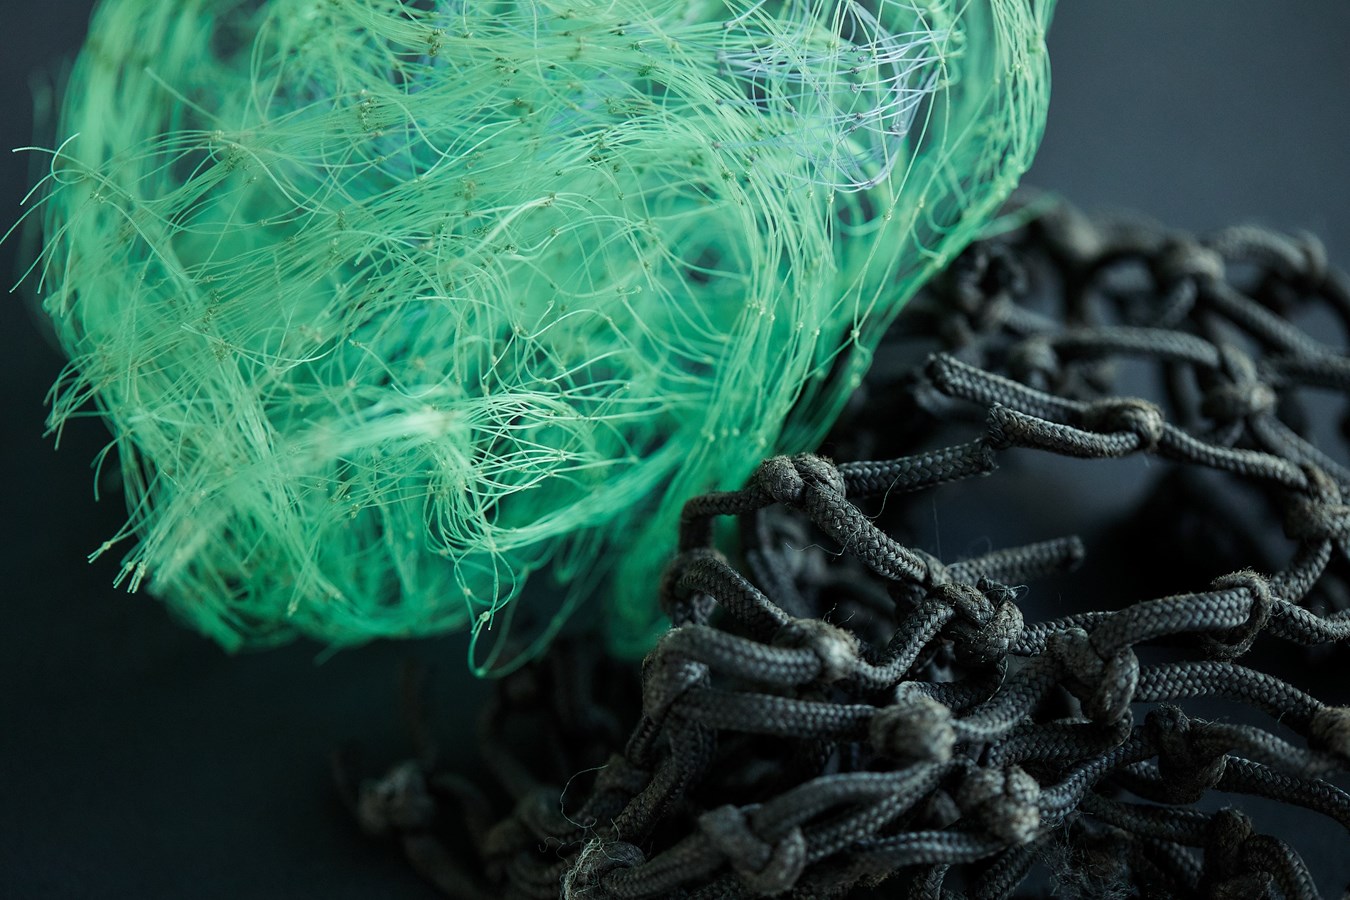 Kia's 10 must-have sustainability items (recycled fishing nets